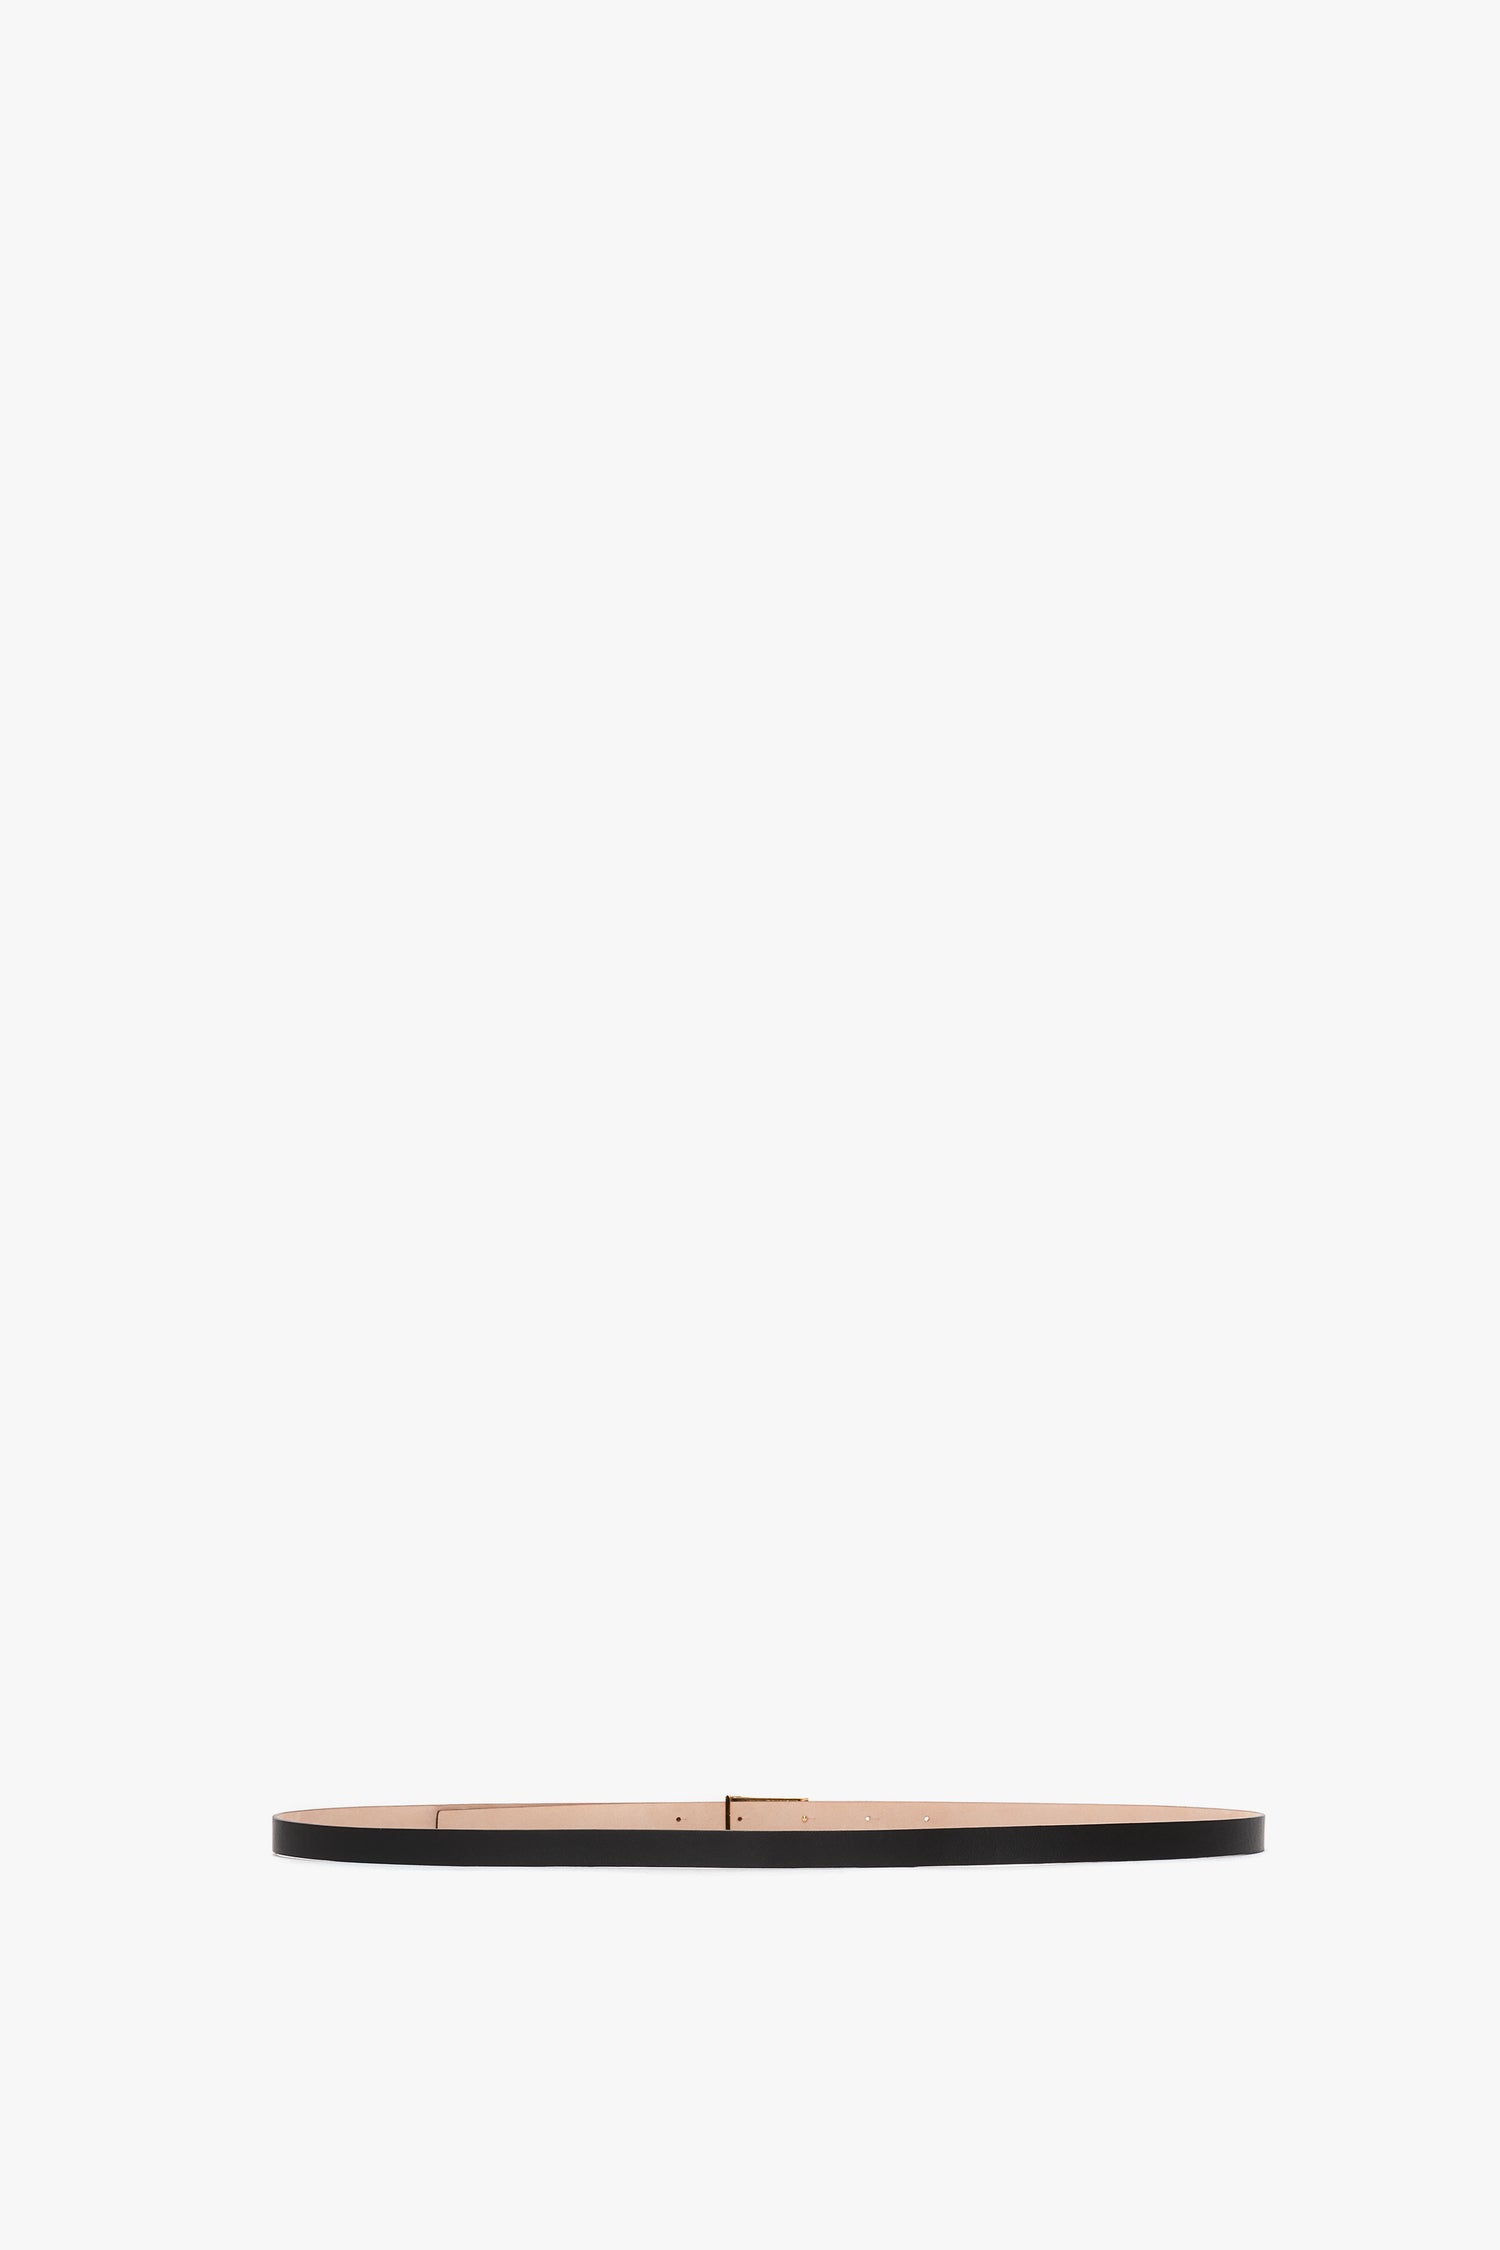 A slim, black calf leather Exclusive Micro Frame belt by Victoria Beckham with a small, rectangular gold buckle, centered on a plain white background.